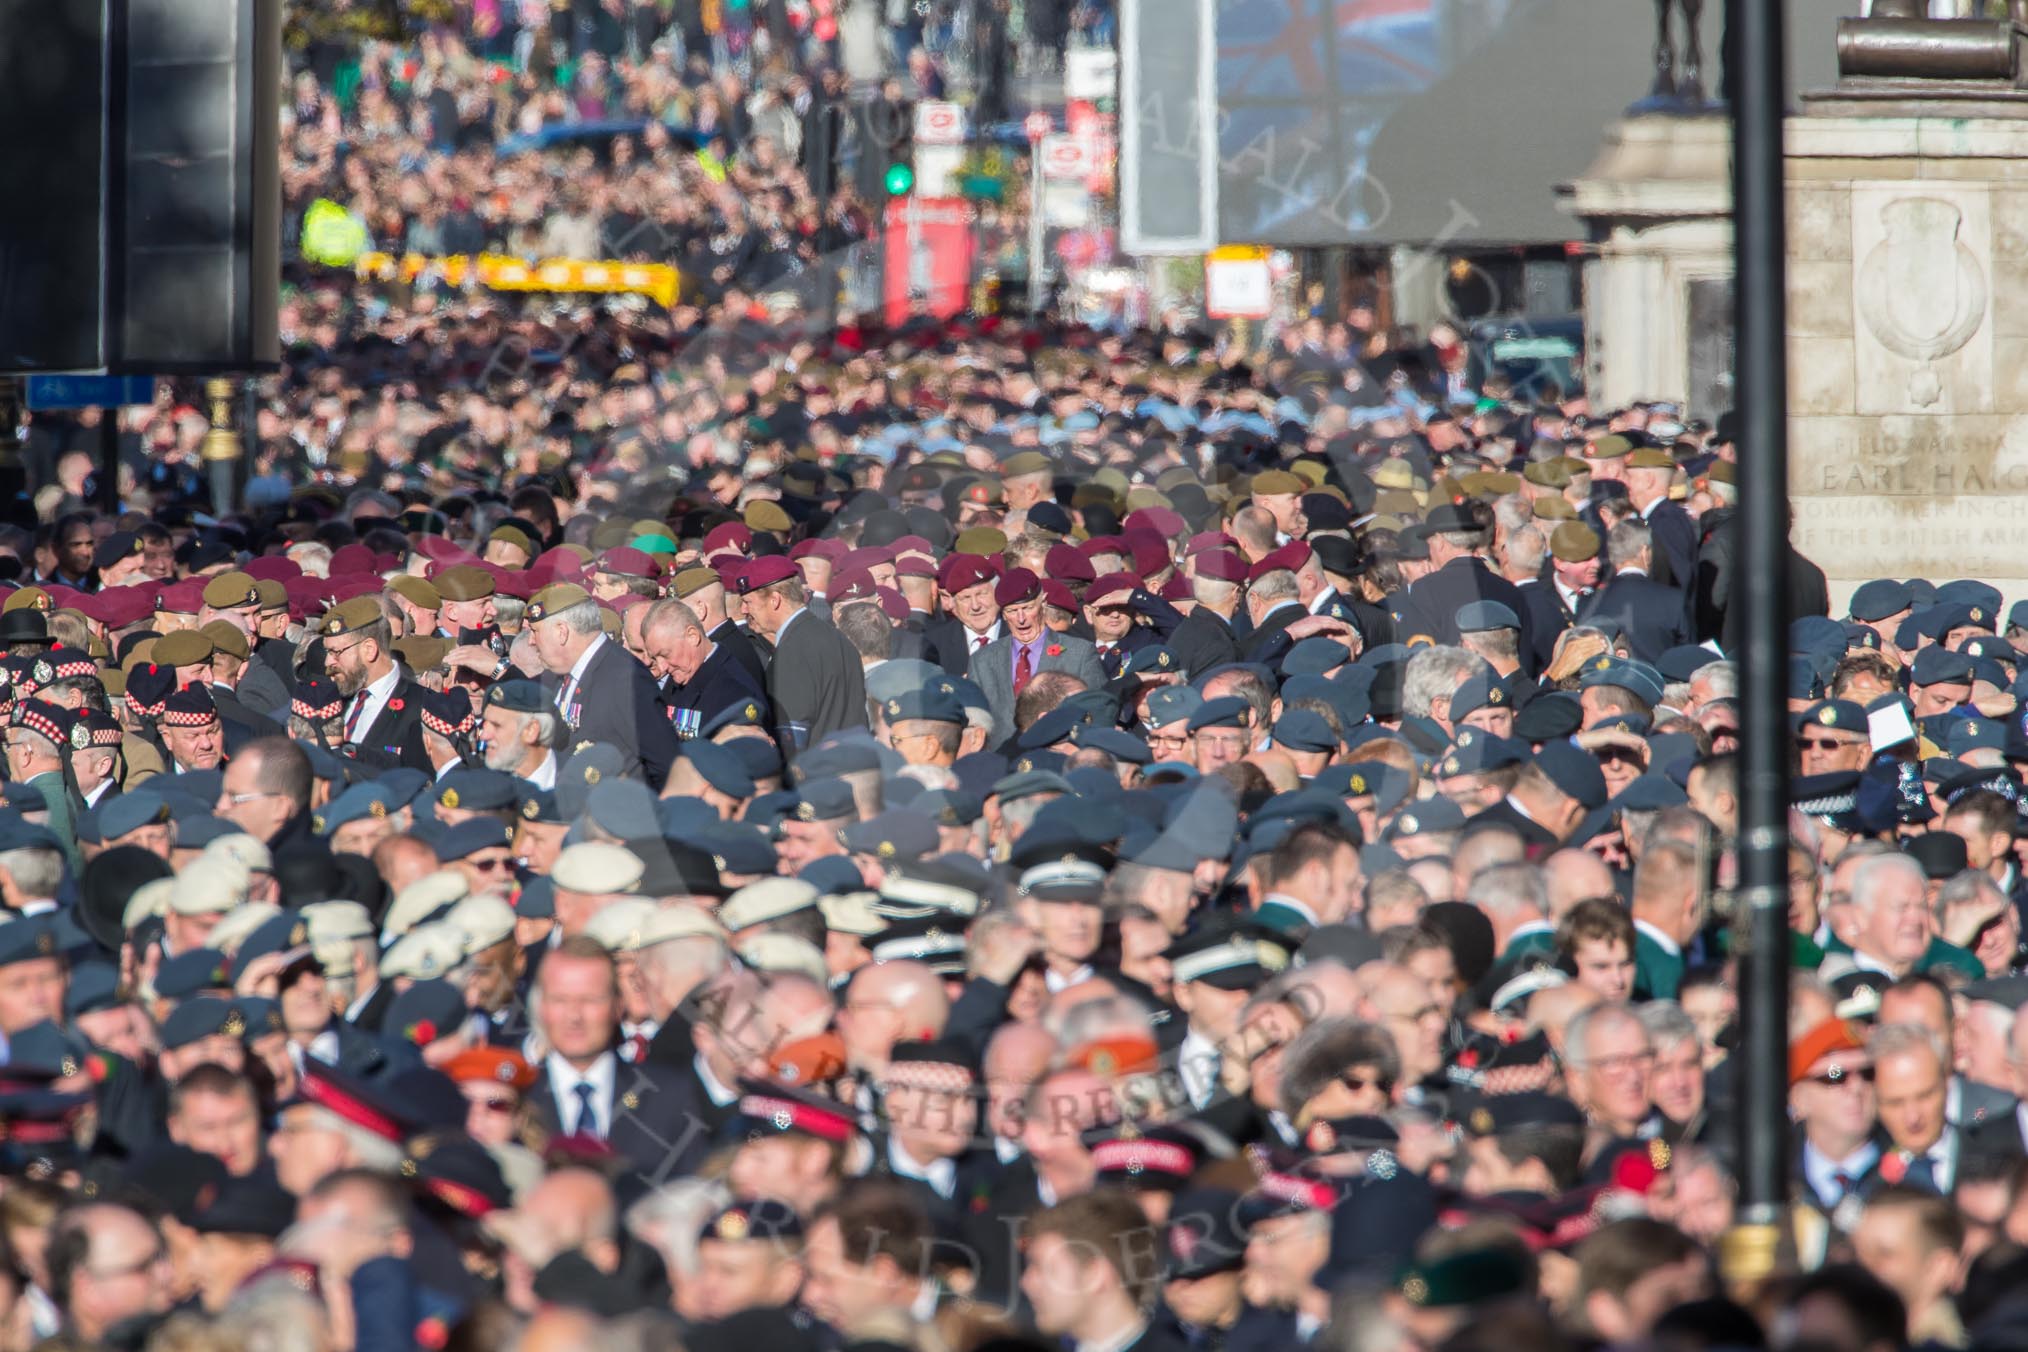 Over 9000 veterans gathering on Whitehall for the March Past during the Remembrance Sunday Cenotaph Ceremony 2018 at Horse Guards Parade, Westminster, London, 11 November 2018, 11:32.